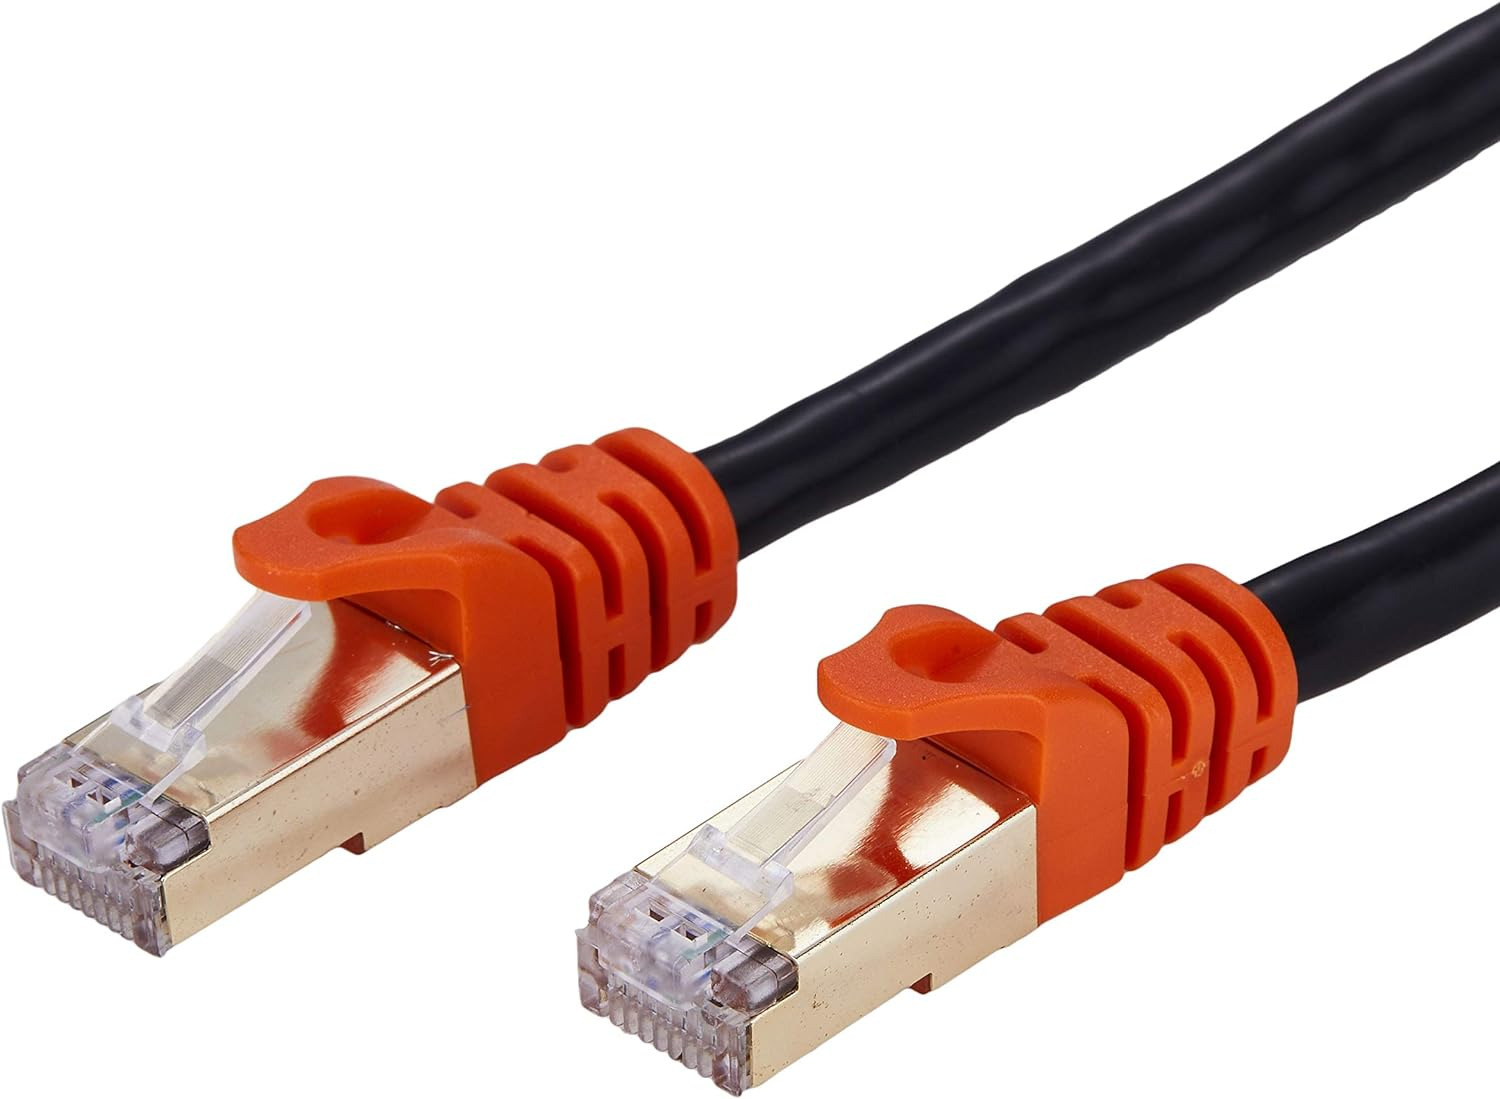 Cables Direct Online 50FT Cat7 Outdoor Ethernet Cable 26AWG SFTP Heavy-Duty Cat 